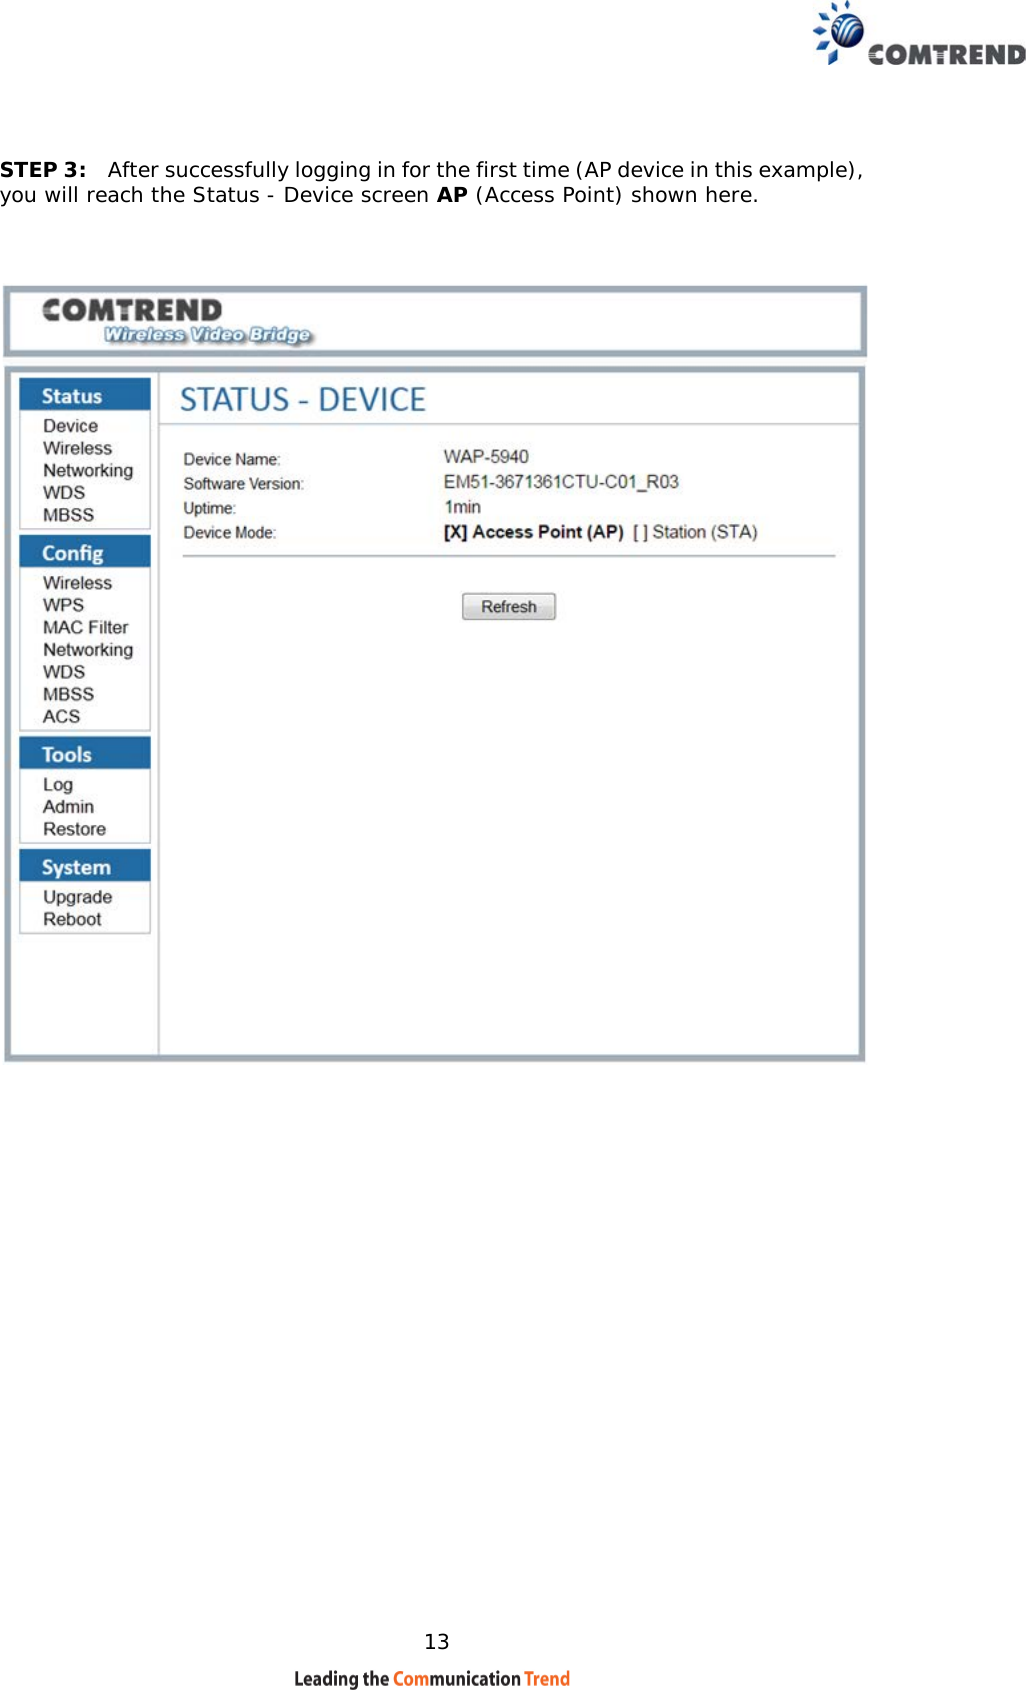    13  STEP 3:  After successfully logging in for the first time (AP device in this example), you will reach the Status - Device screen AP (Access Point) shown here.        